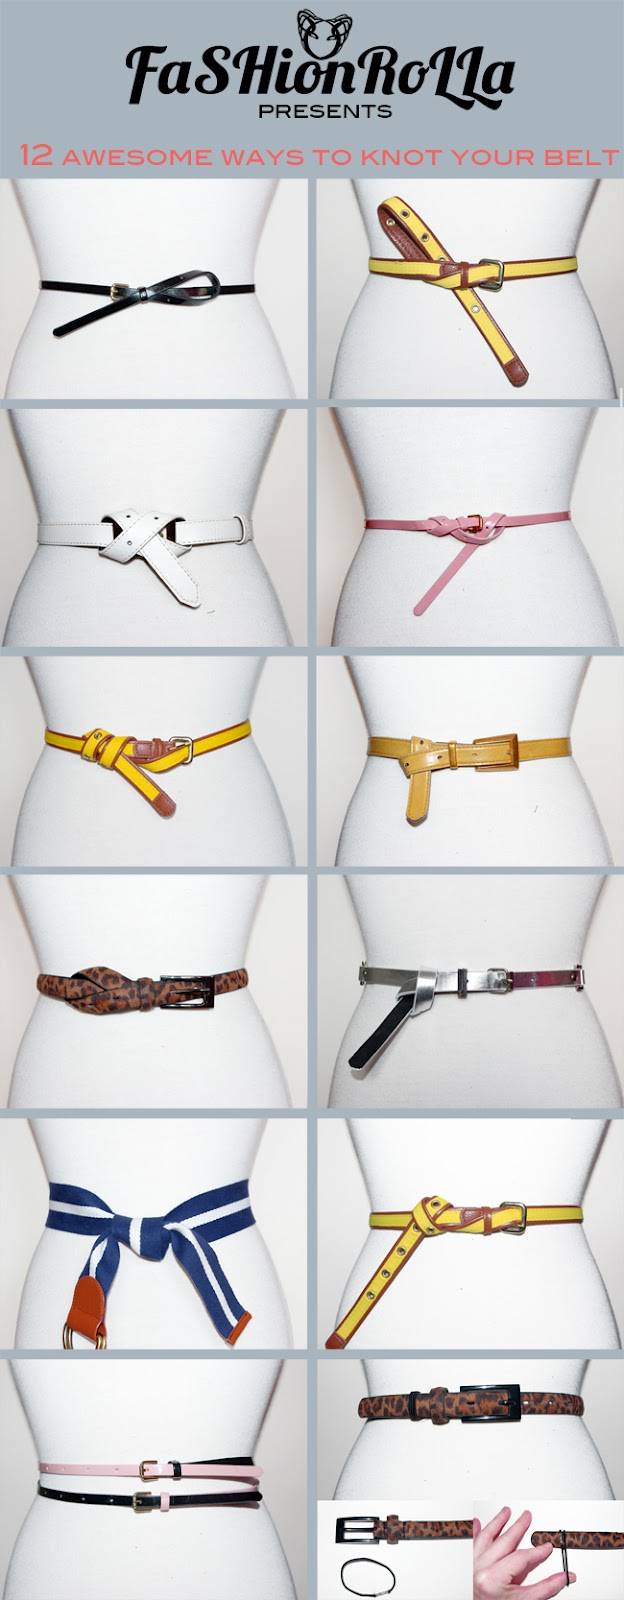 35+ Useful Clothing Hacks Every Woman Should Know --> Creative and fashionable ways to knot a belt